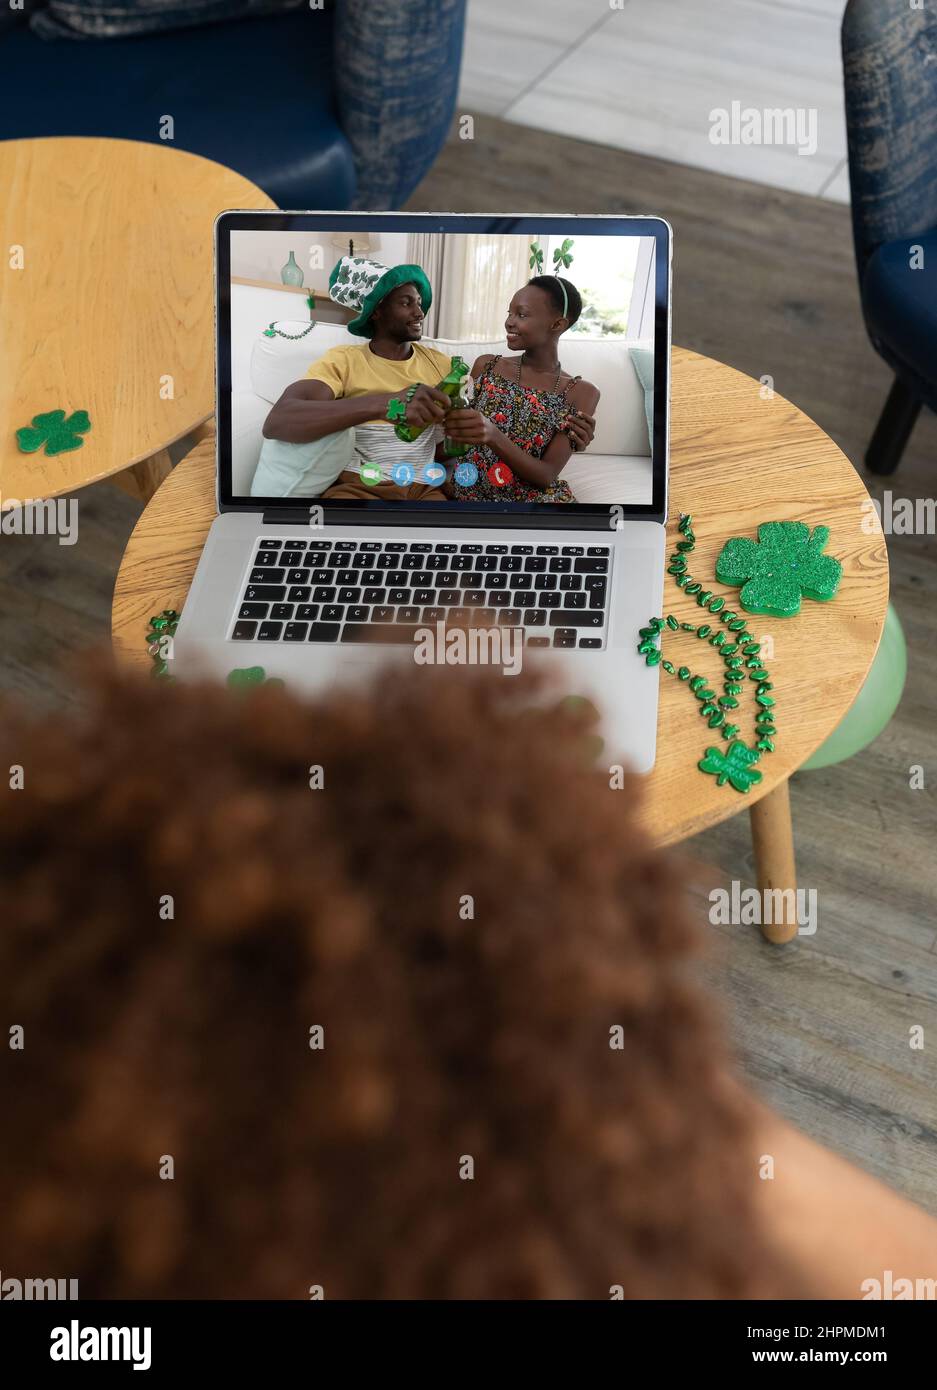 Man at bar making st patrick's day video call with happy couple making a toast with beers on laptop Stock Photo